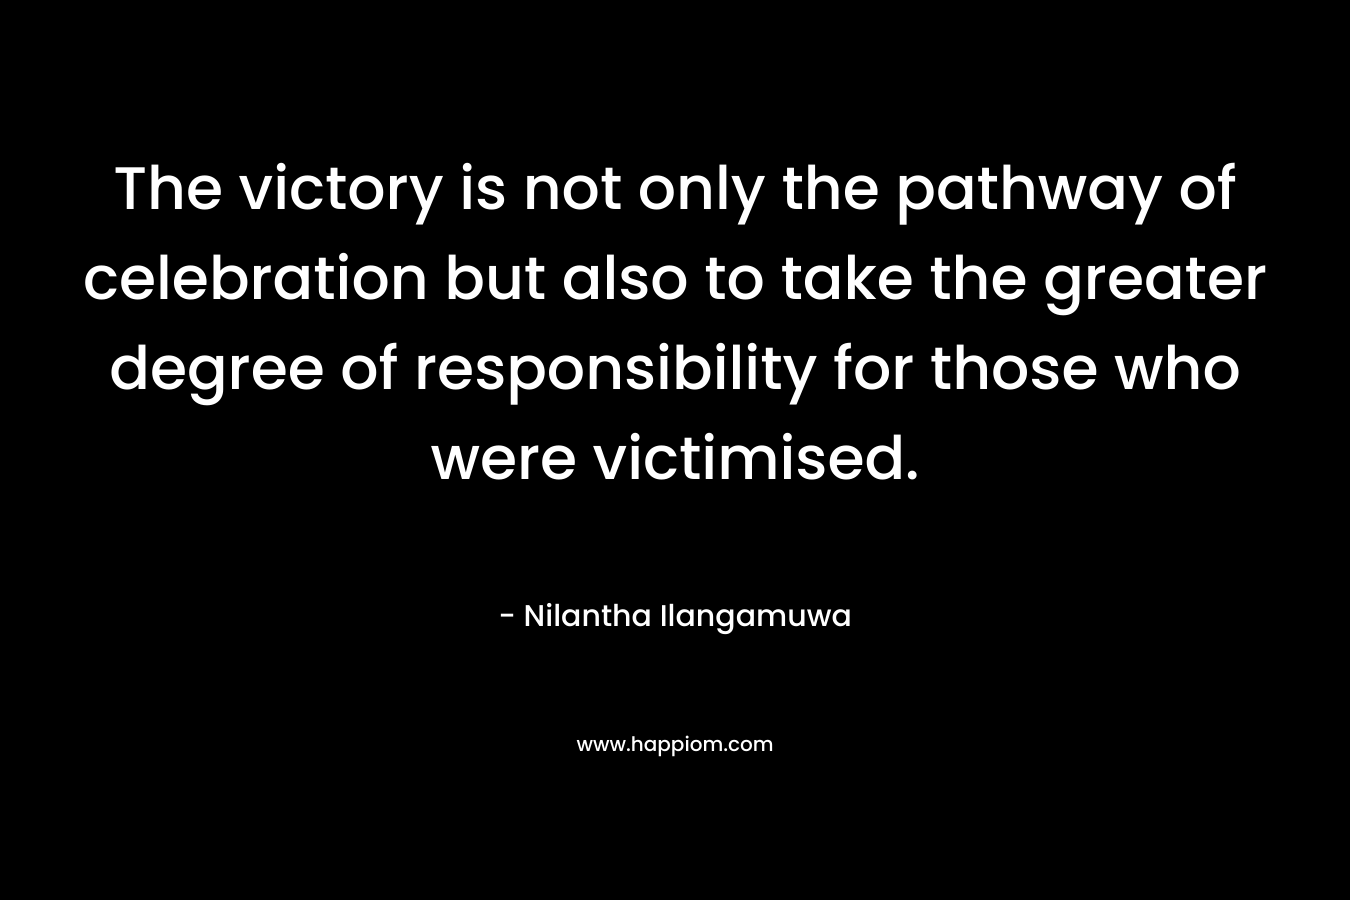 The victory is not only the pathway of celebration but also to take the greater degree of responsibility for those who were victimised. – Nilantha Ilangamuwa